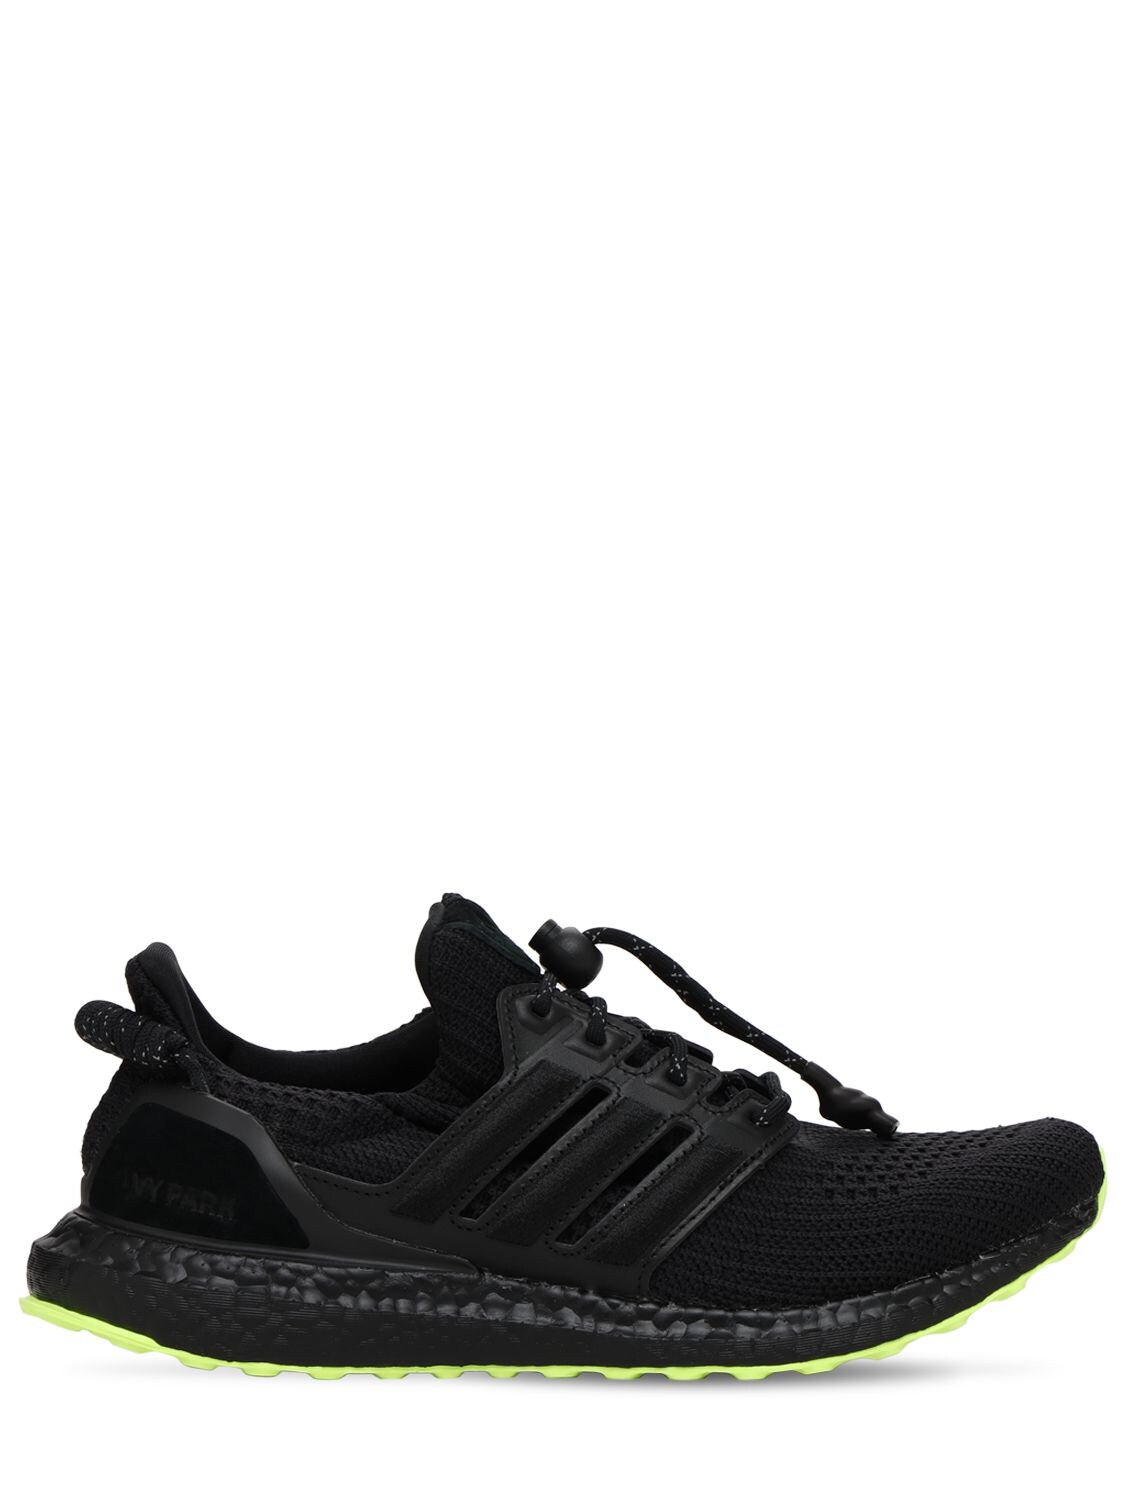 Adidas X Ivy Park Ivy Park Ultra Boost Og Trainers In Black